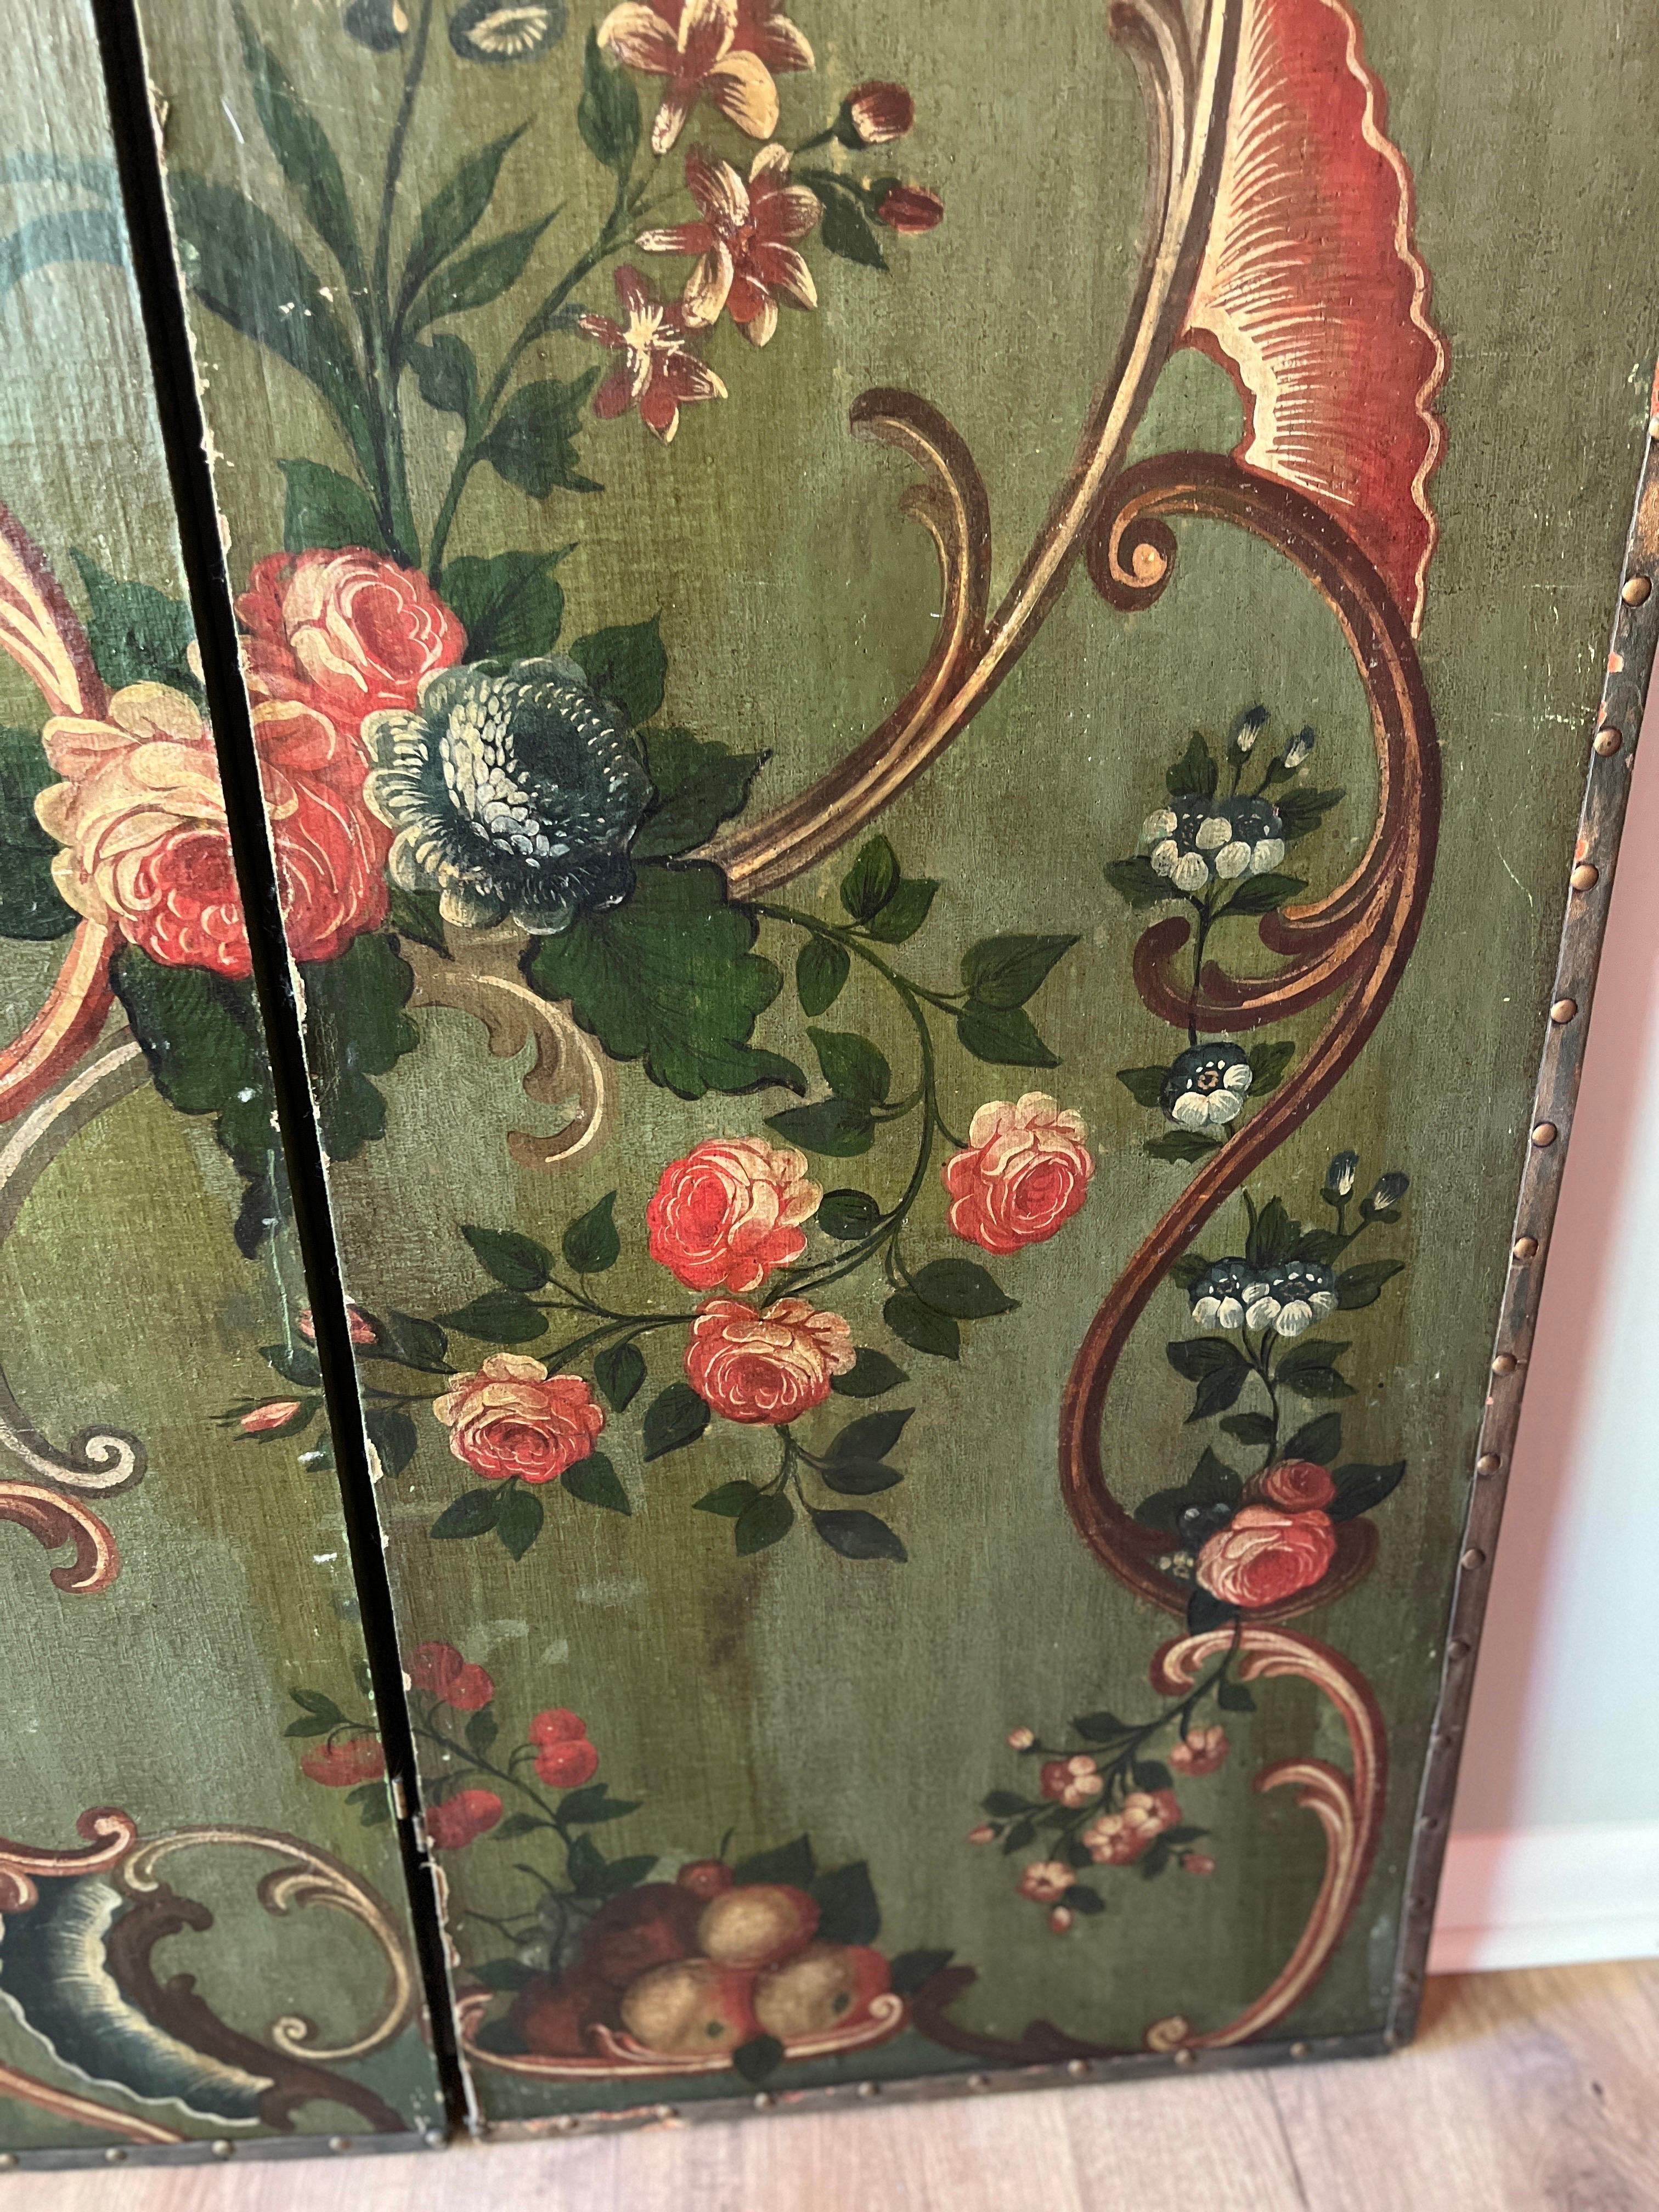 19th Century Italian Floral Painted 3 Panel Folding Floor Screen / Room Divider For Sale 3